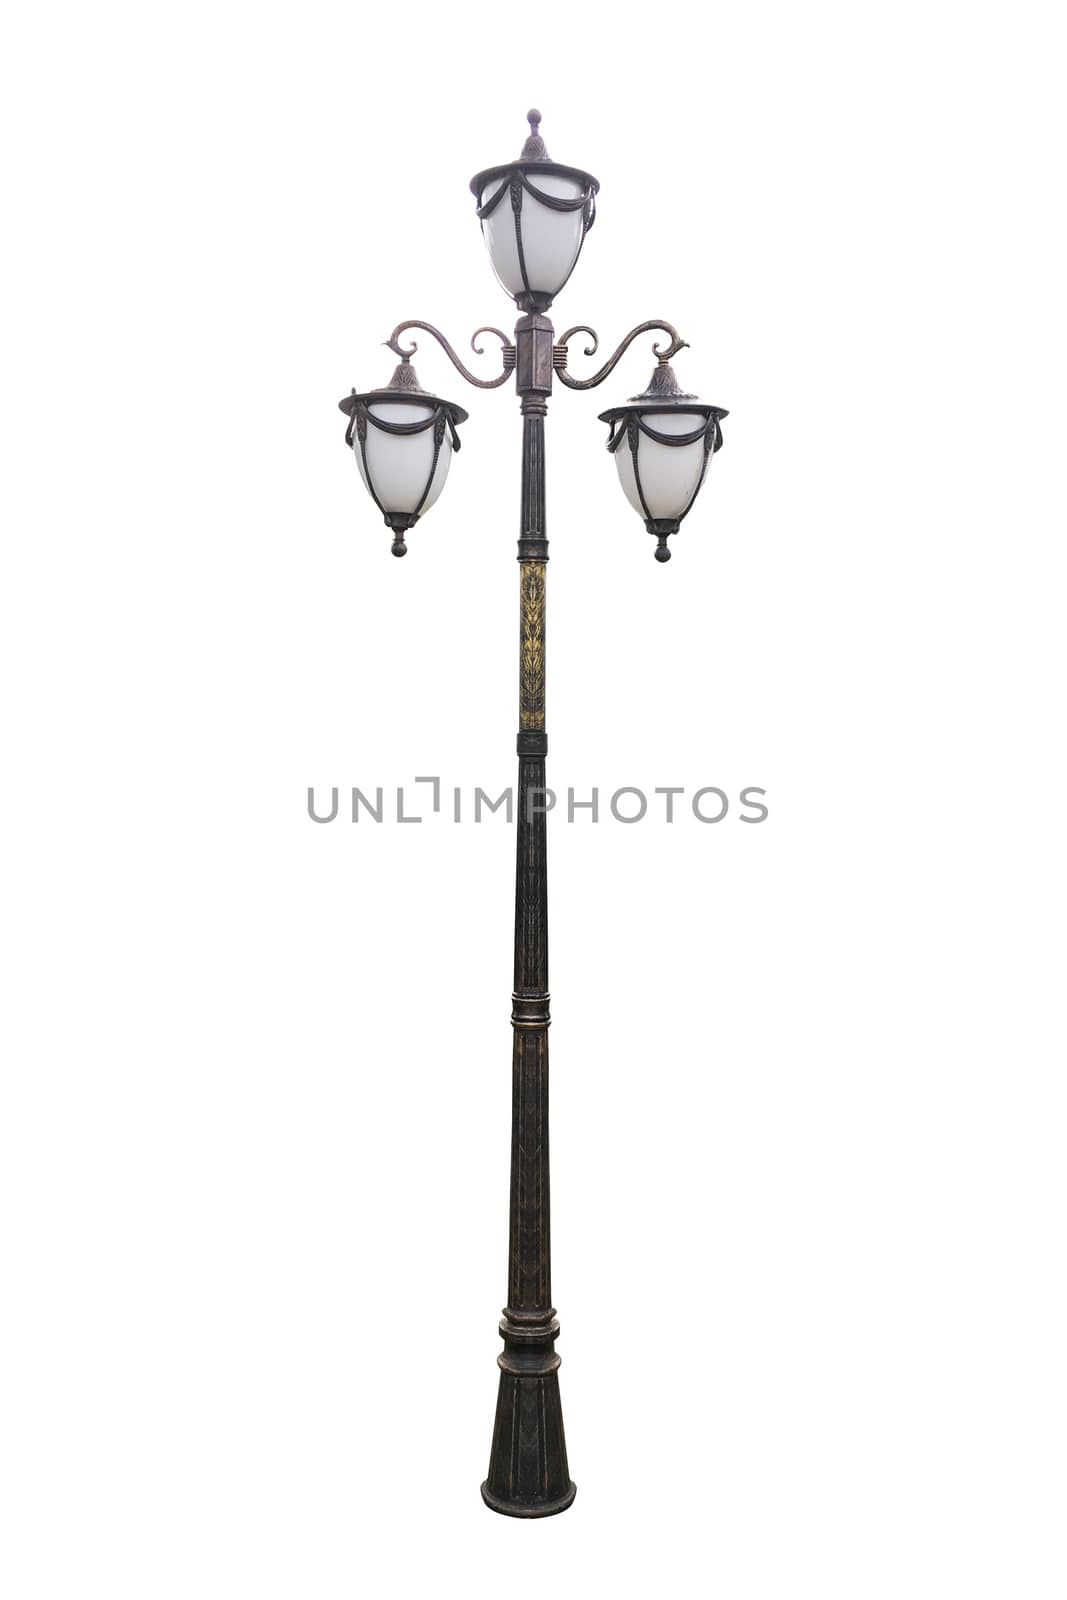 Street lamppost with clipping path isolate on white background by Surasak